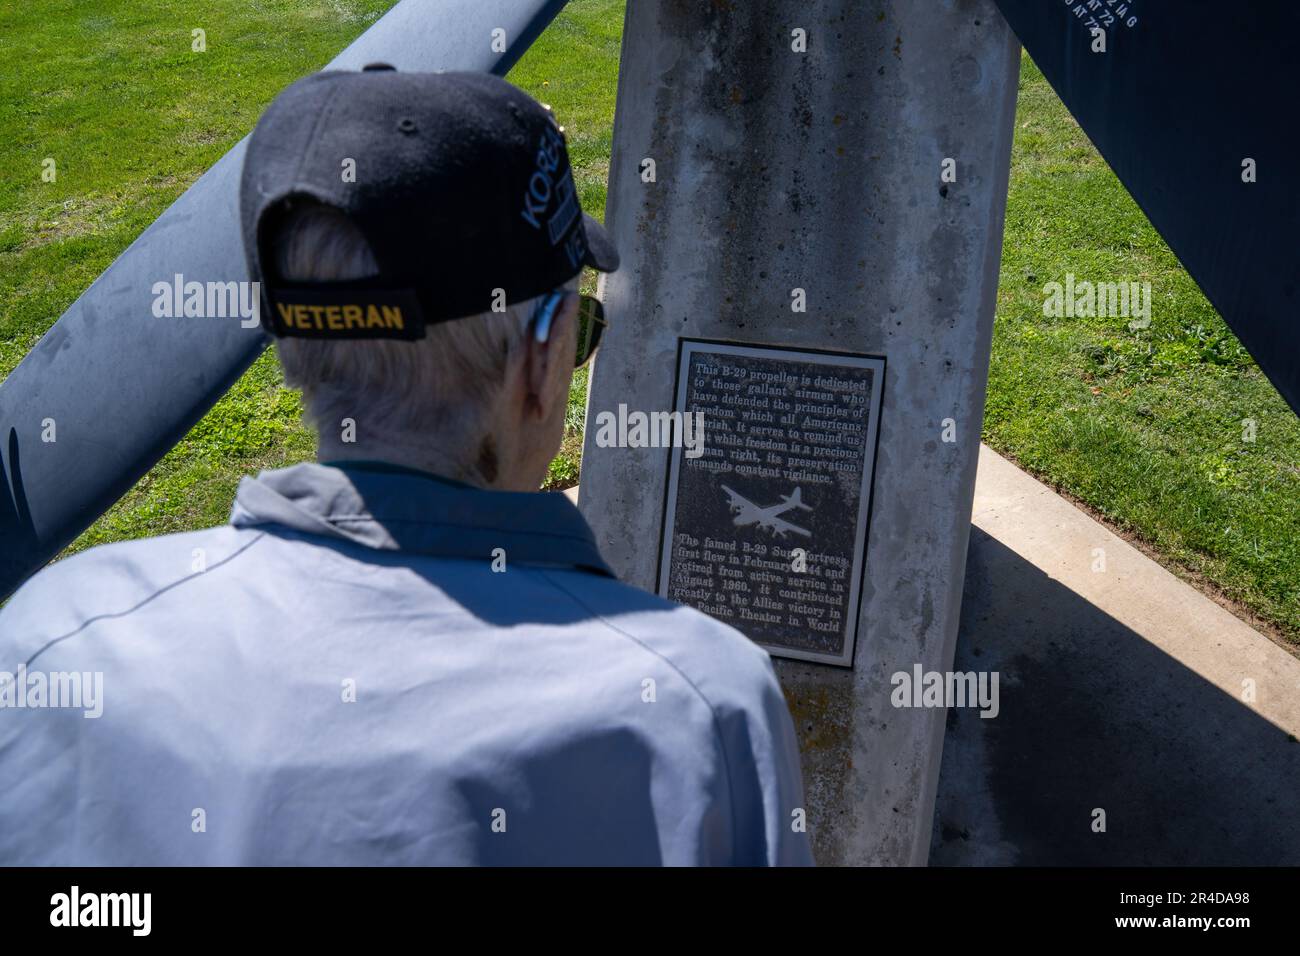 Retired Master Sgt. Eugene T. Beal reads a plaque at a B-29 Superfortress propeller display April 3, 2023, at Beale Air Force Base, California. Eugene spent most of his career as a boom operator in the KC-97 Stratofreighter and the KC-135 Stratotanker. Upon enlisting in March 1952, he was sent to fight in the Korean War as a tail gunner in the B-29 Superfortress. Stock Photo